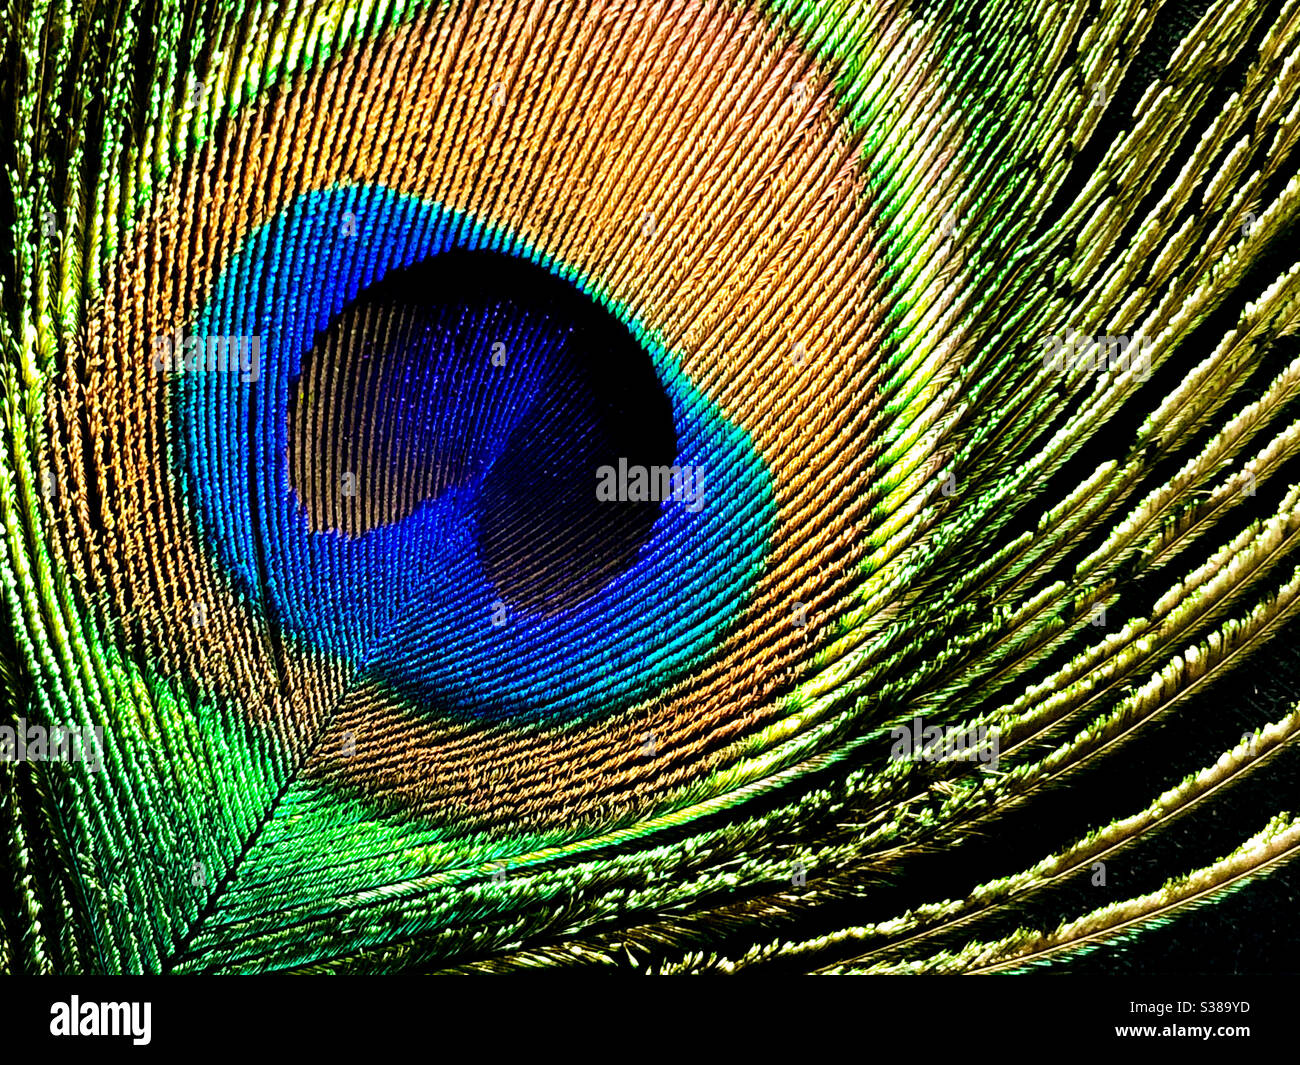 Close up of a single peacock feather on black background Stock Photo